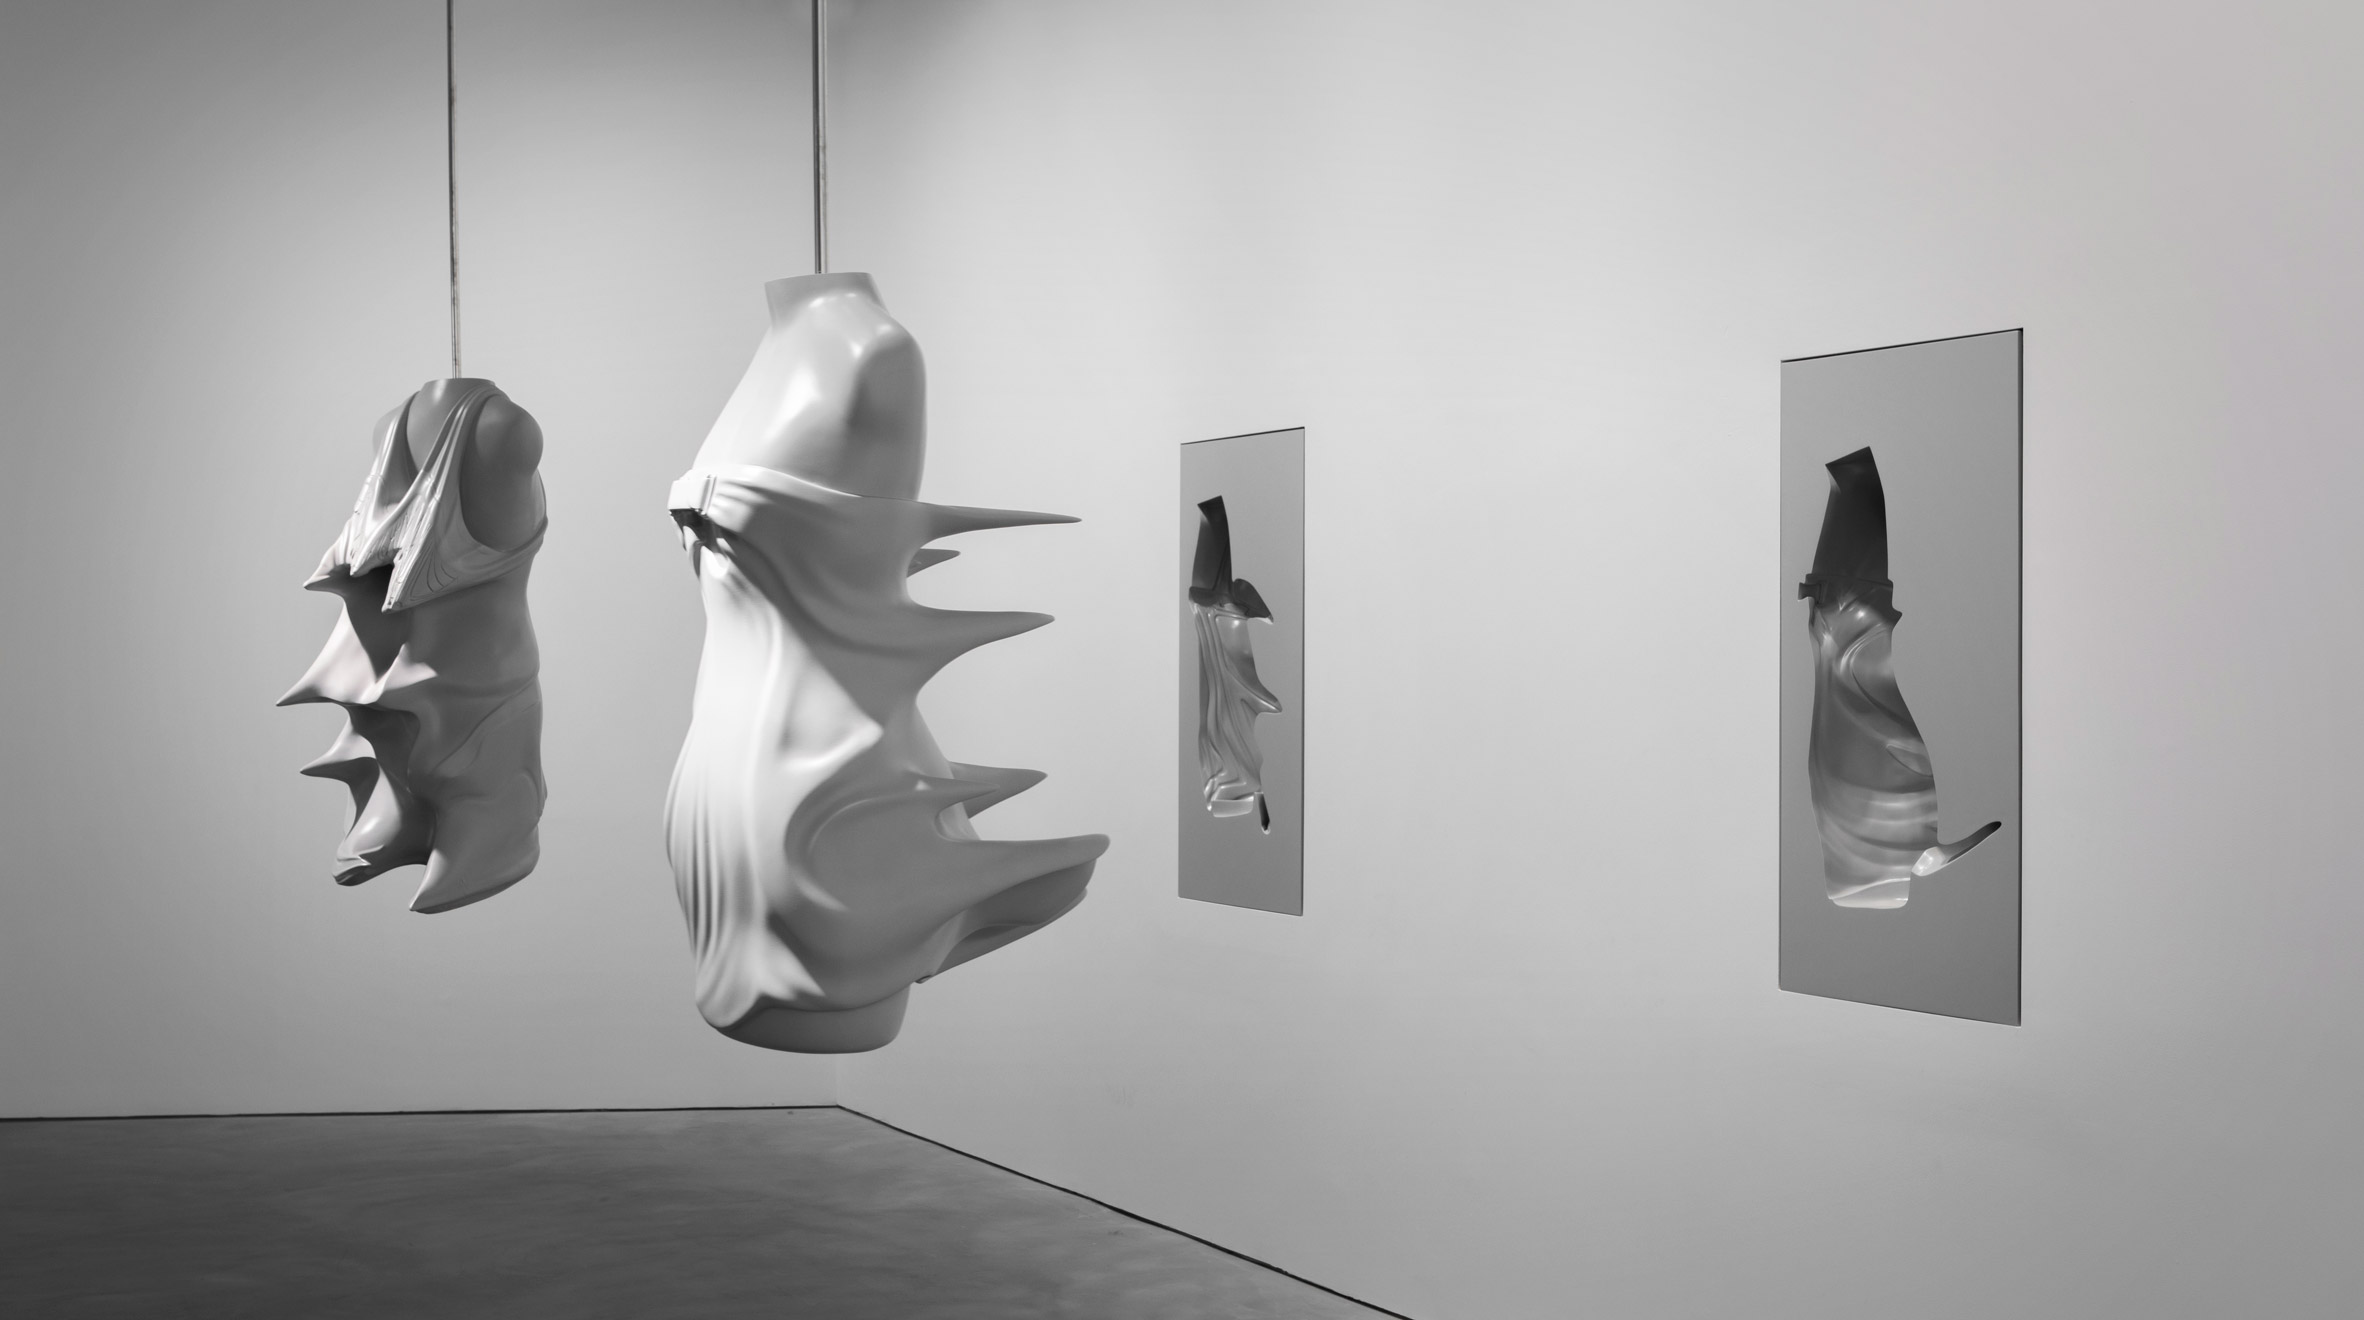 Moulds of busts from the Inertia collection are suspended from the ceiling